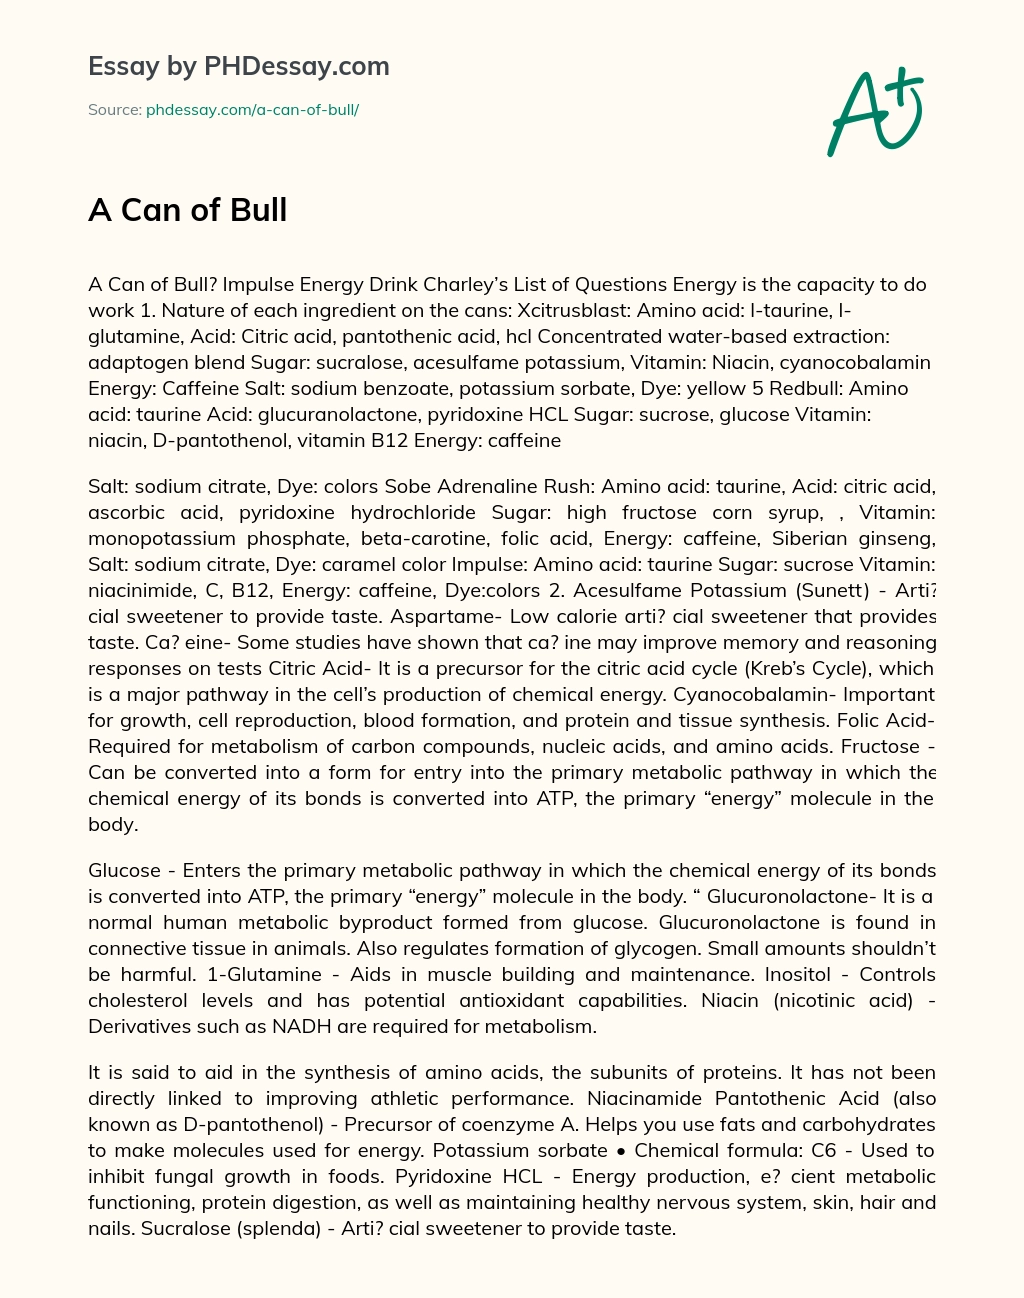 A Can of Bull essay